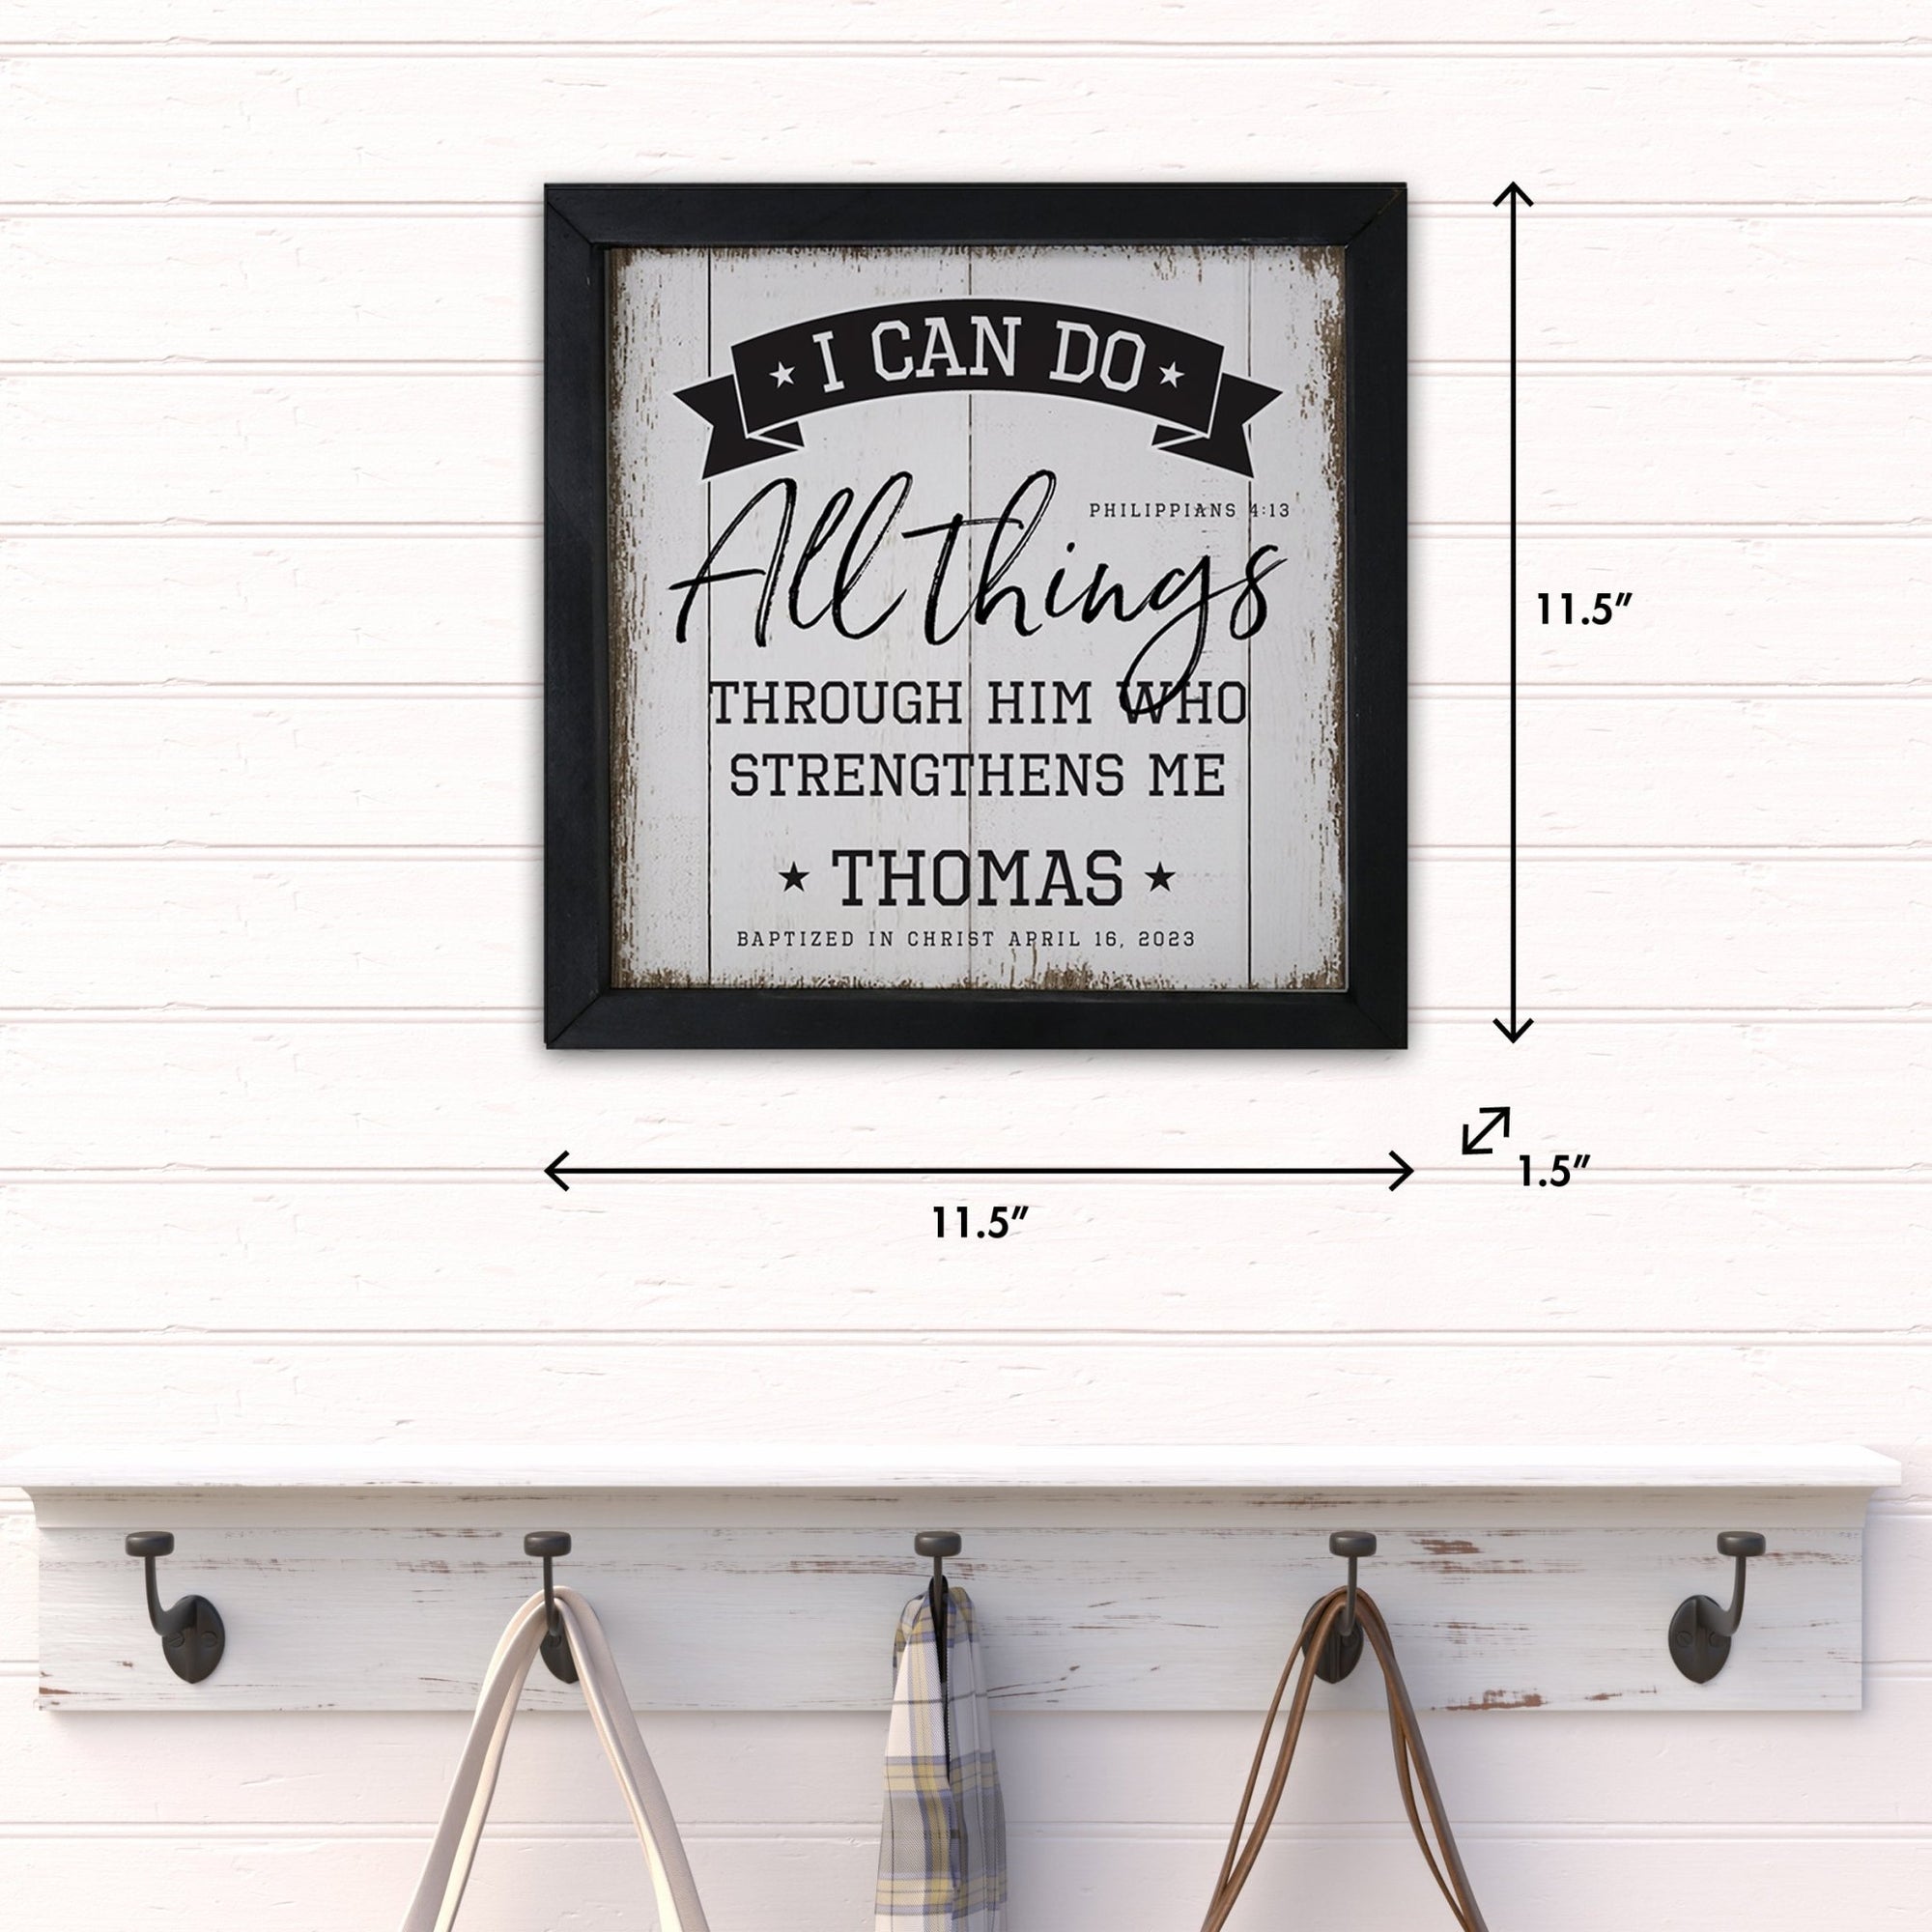 Personalized Elegant Baseball Framed Shadow Box Shelf Décor With Inspiring Bible Verses - I Can Do All Things - LifeSong Milestones